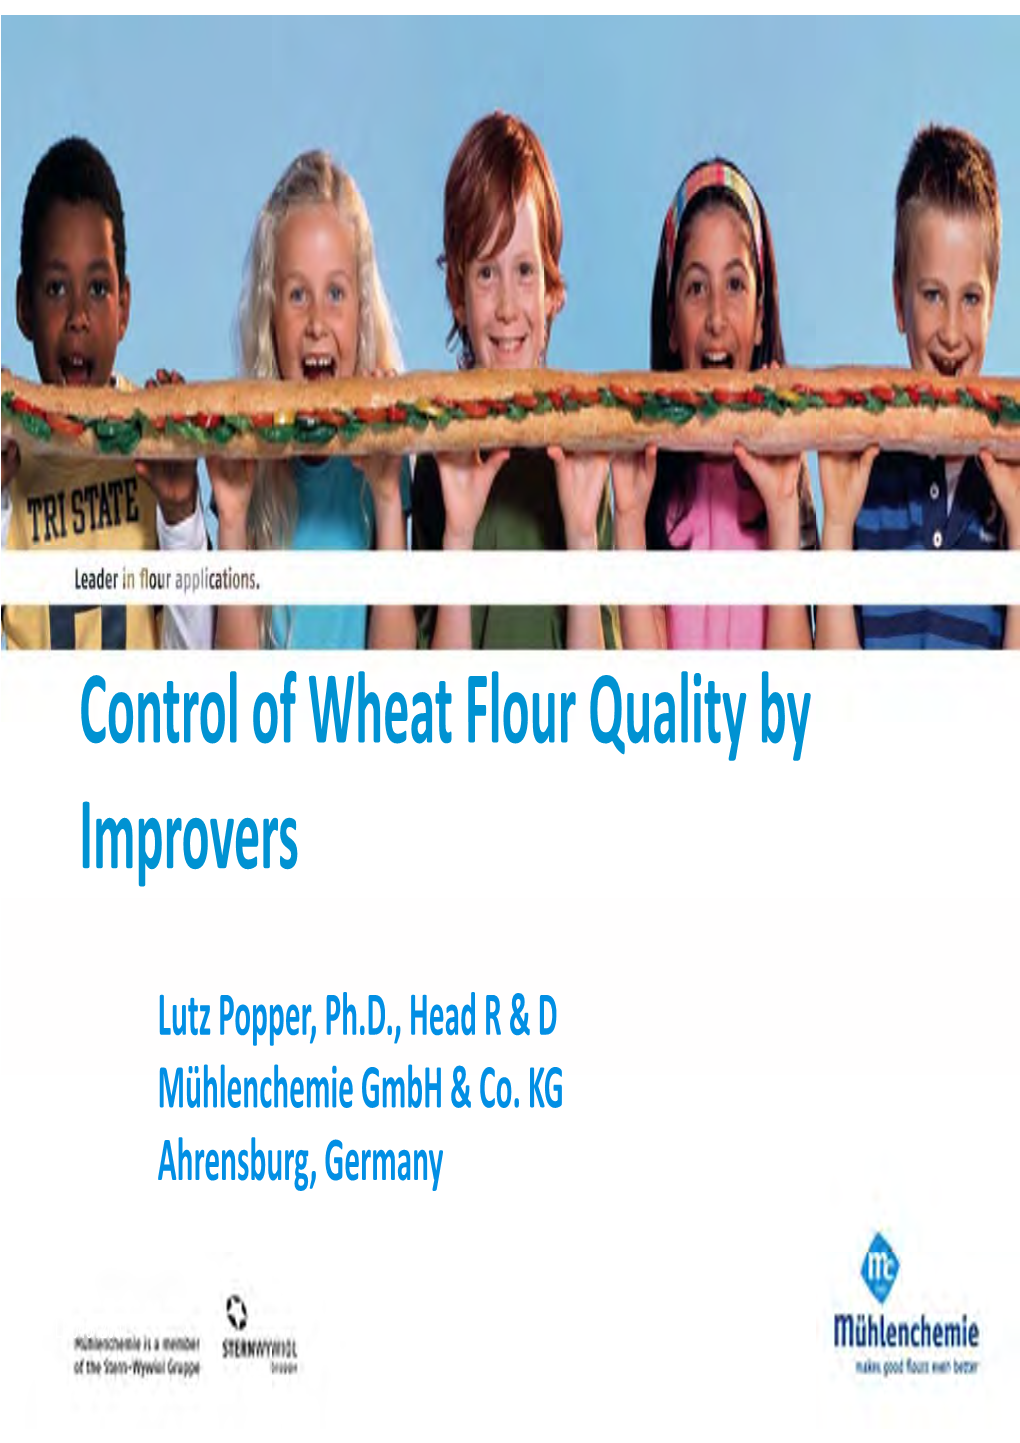 Control of Wheat Flour Quality by Improvers